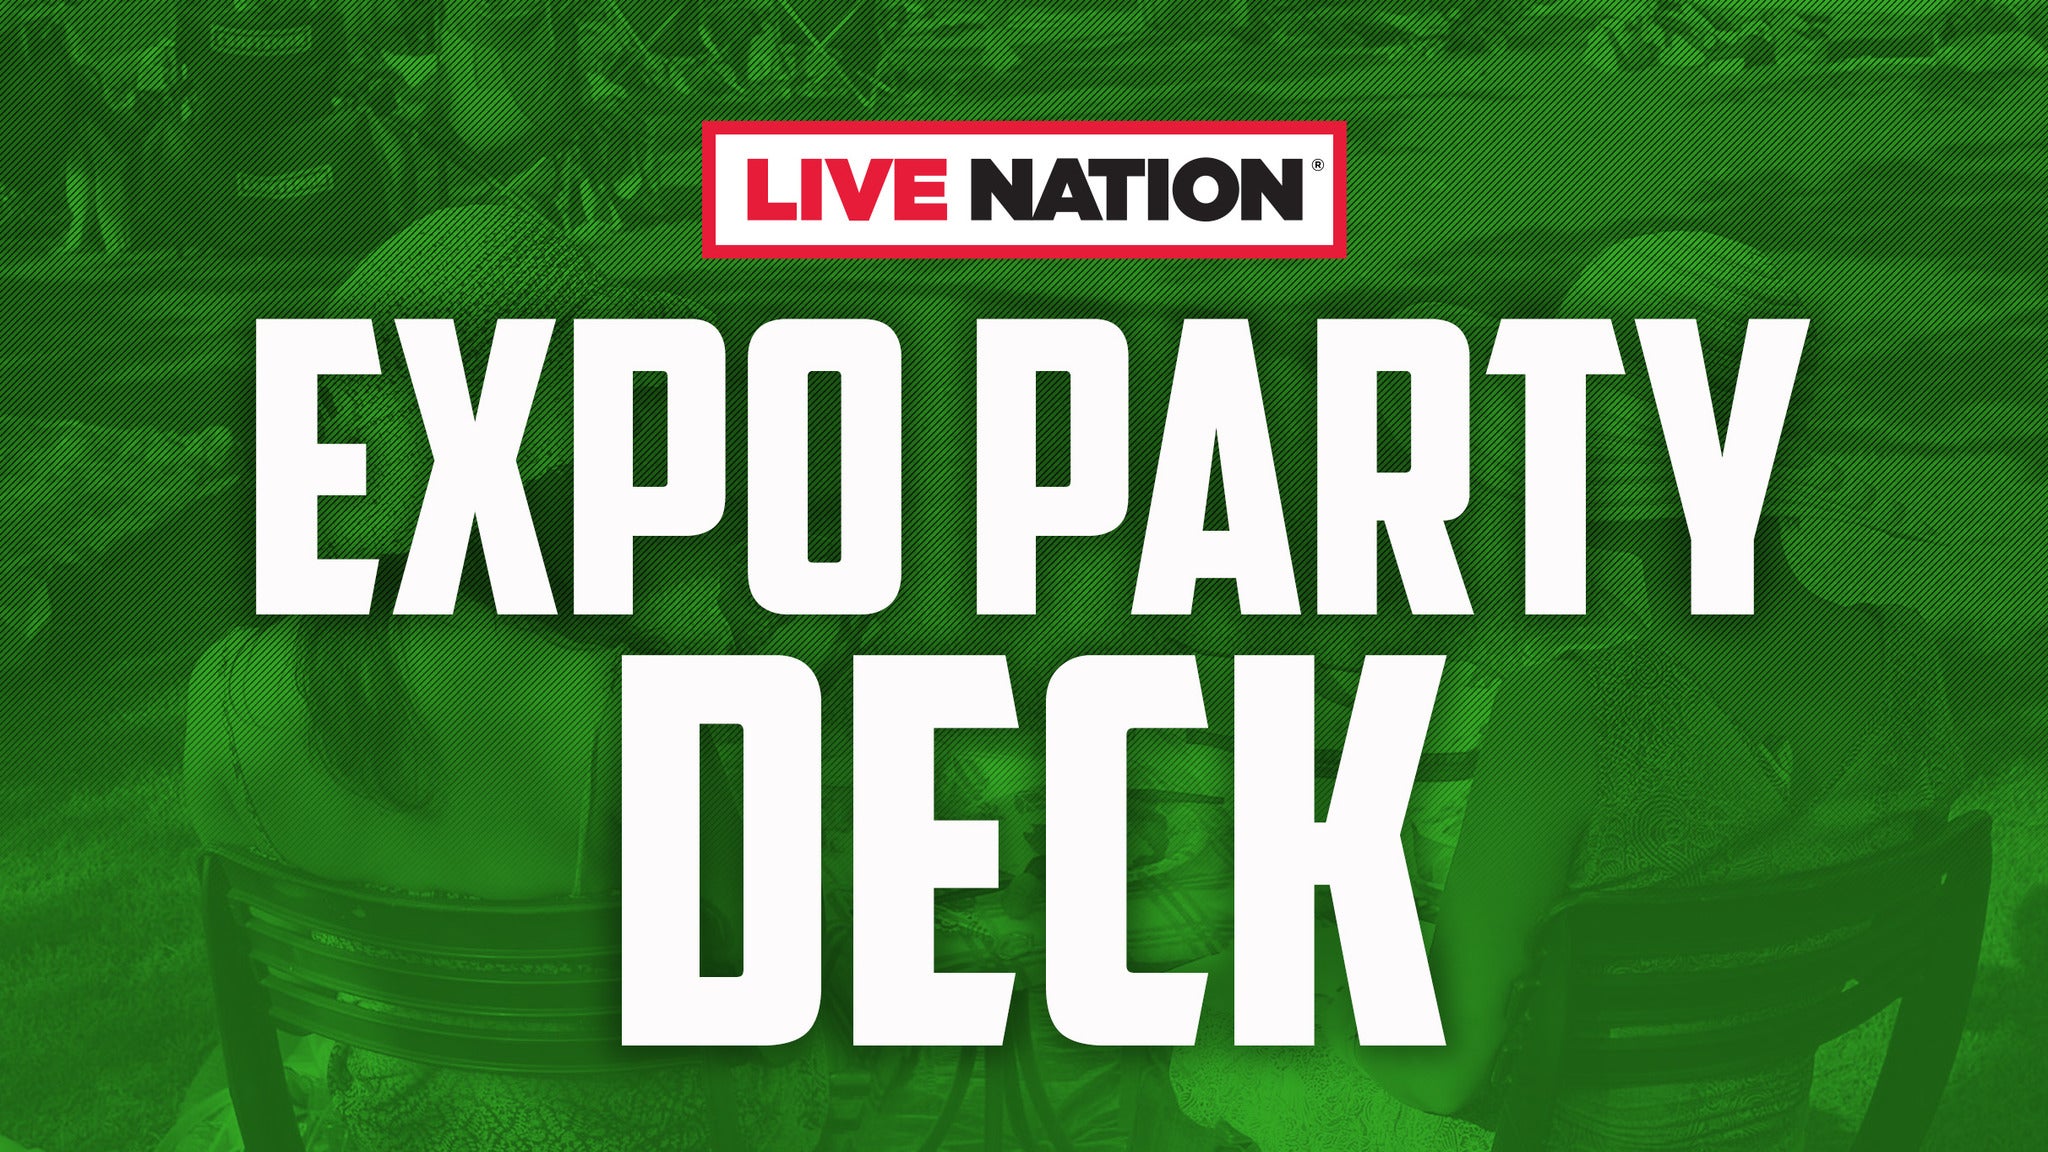 Alpine Valley Expo Party Deck tour dates, presales, tickets and more